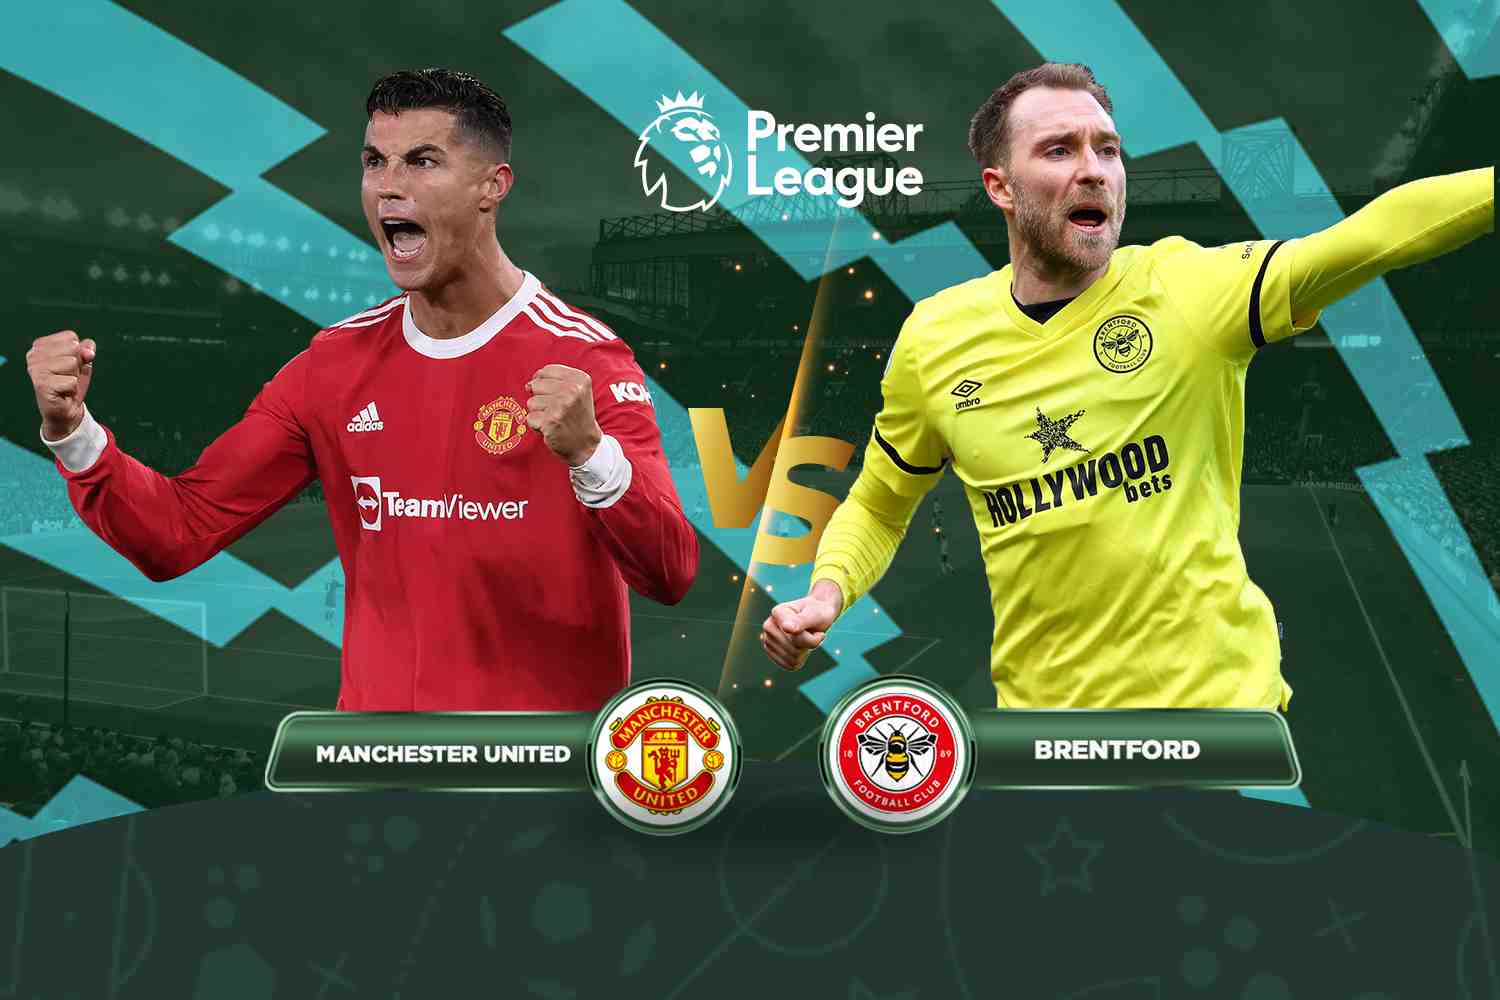 Manchester United vs Brentford: Match Preview and Betting Prediction